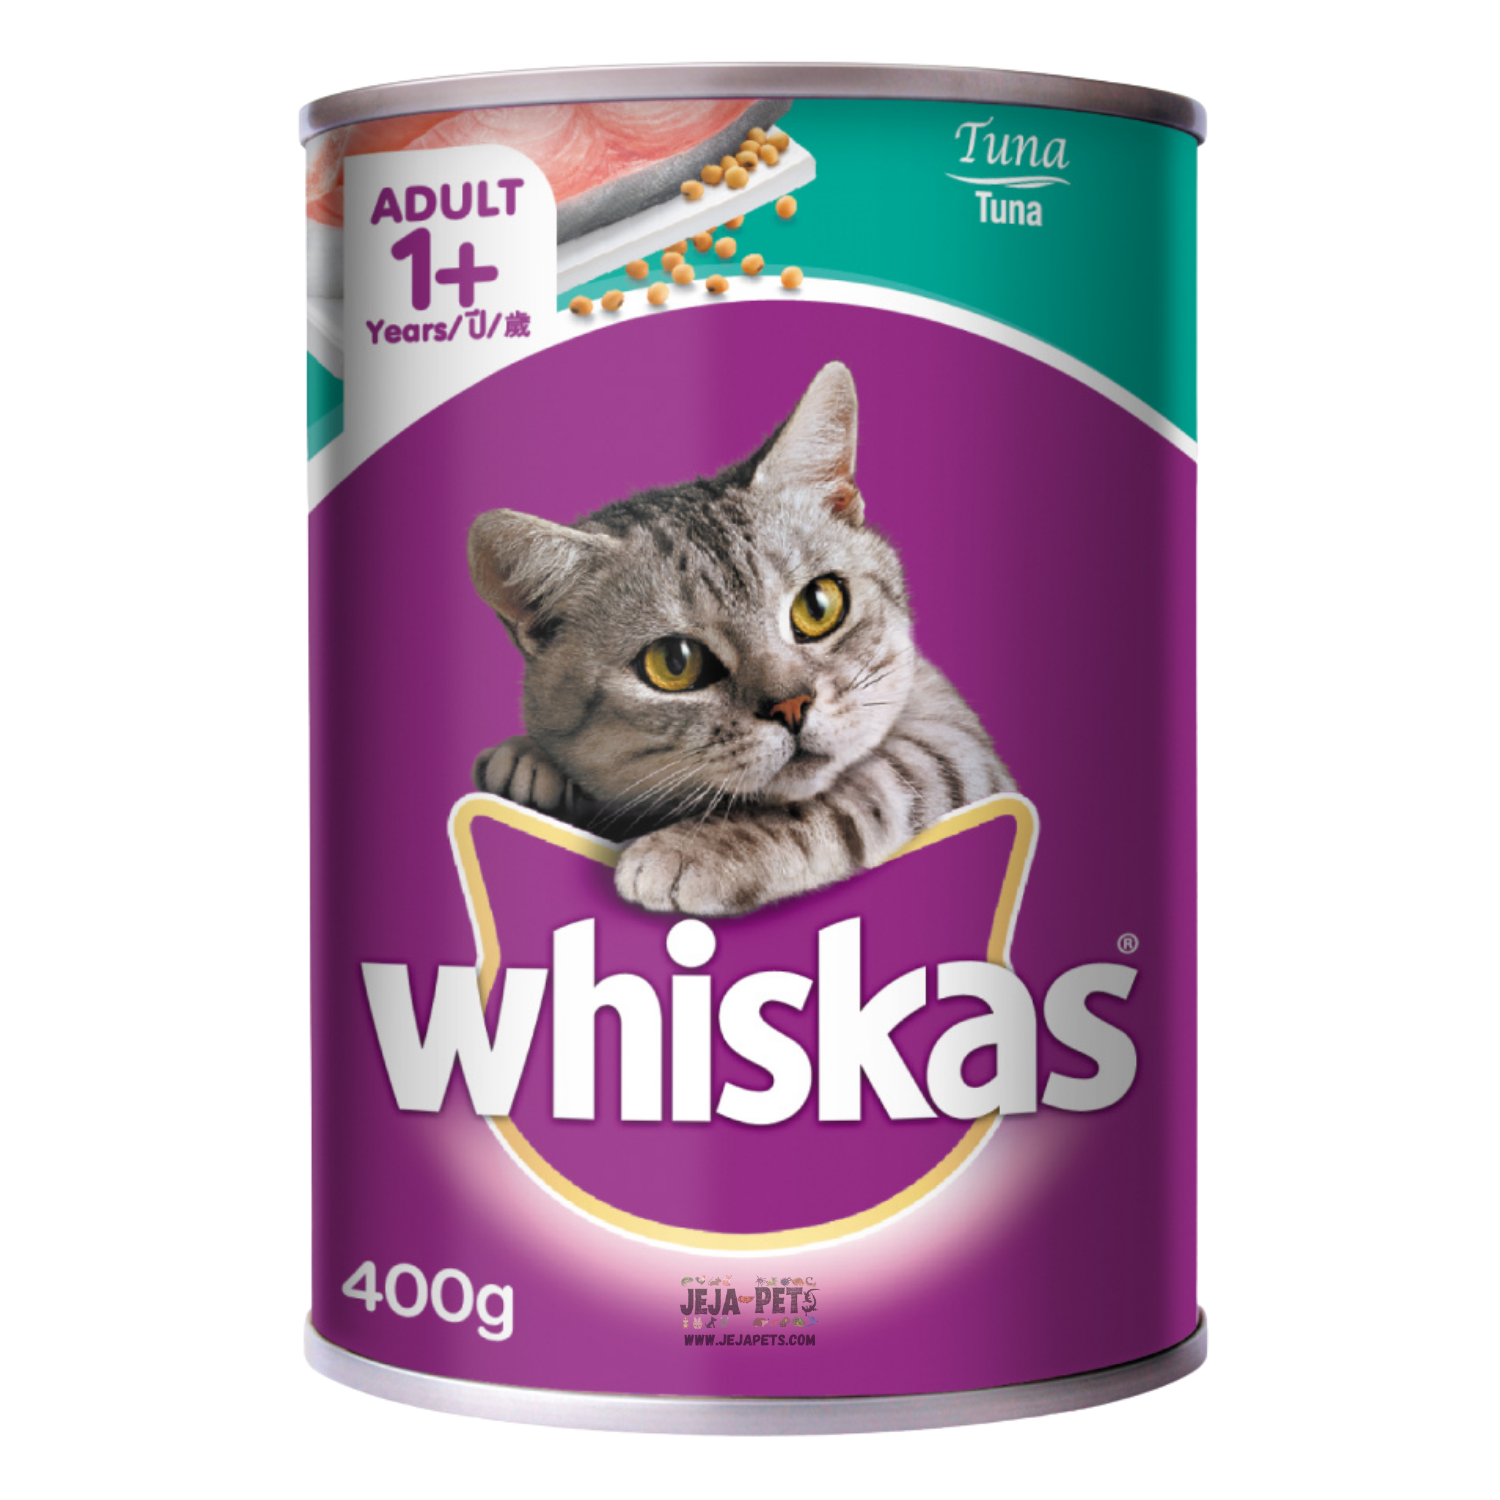 Whiskas Tuna Cat Canned Food - 400g